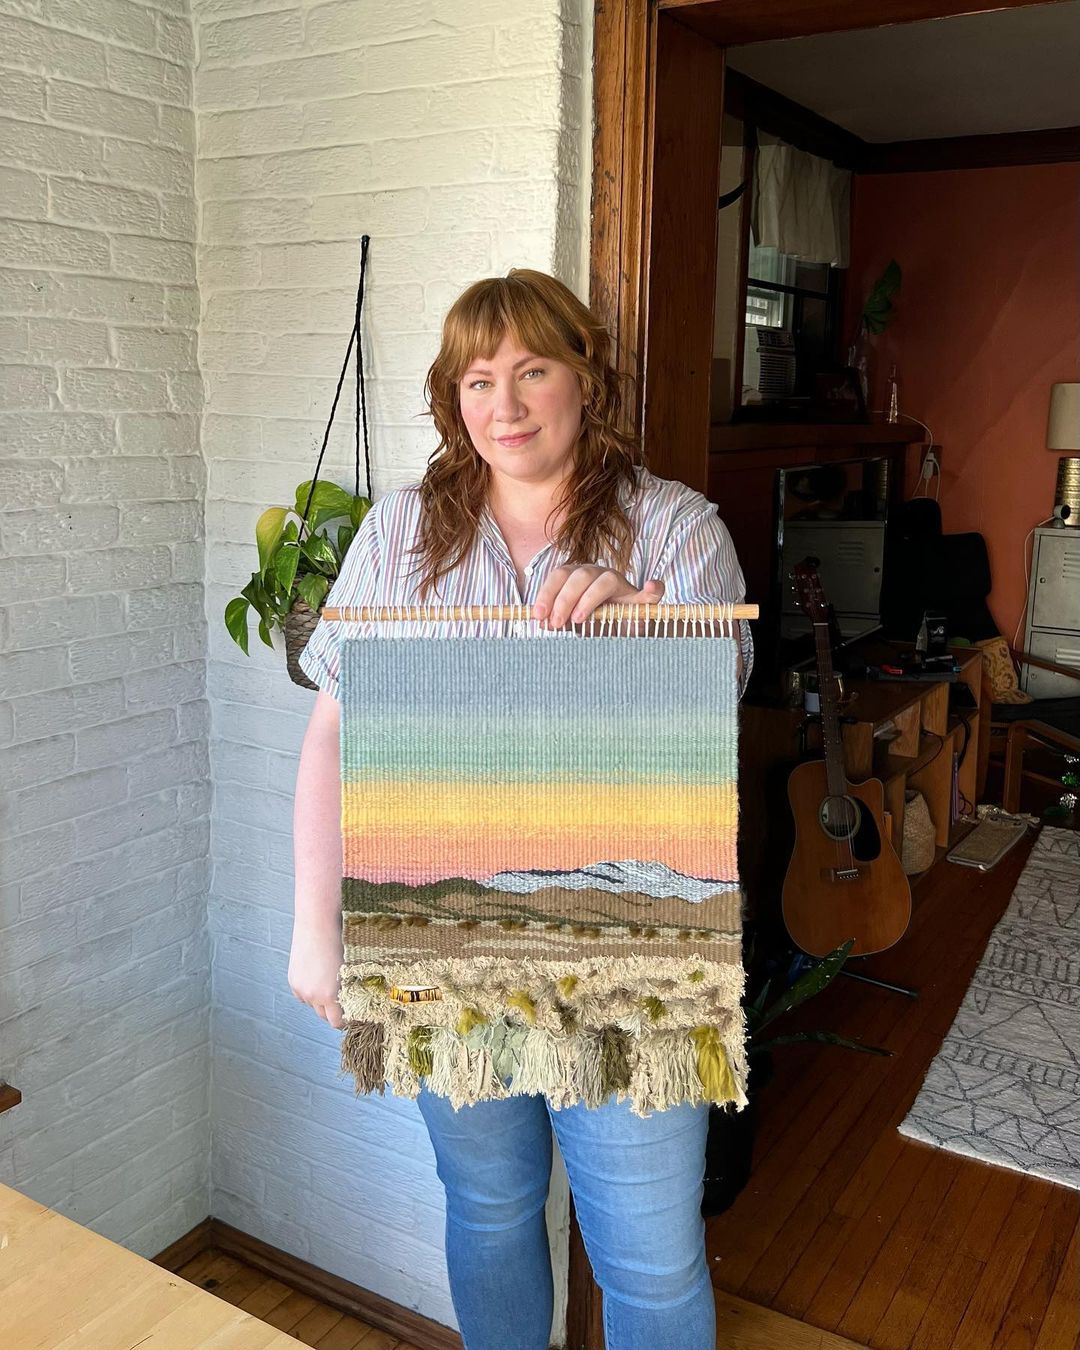 Painted Sky Textiles by Adrienne Lee